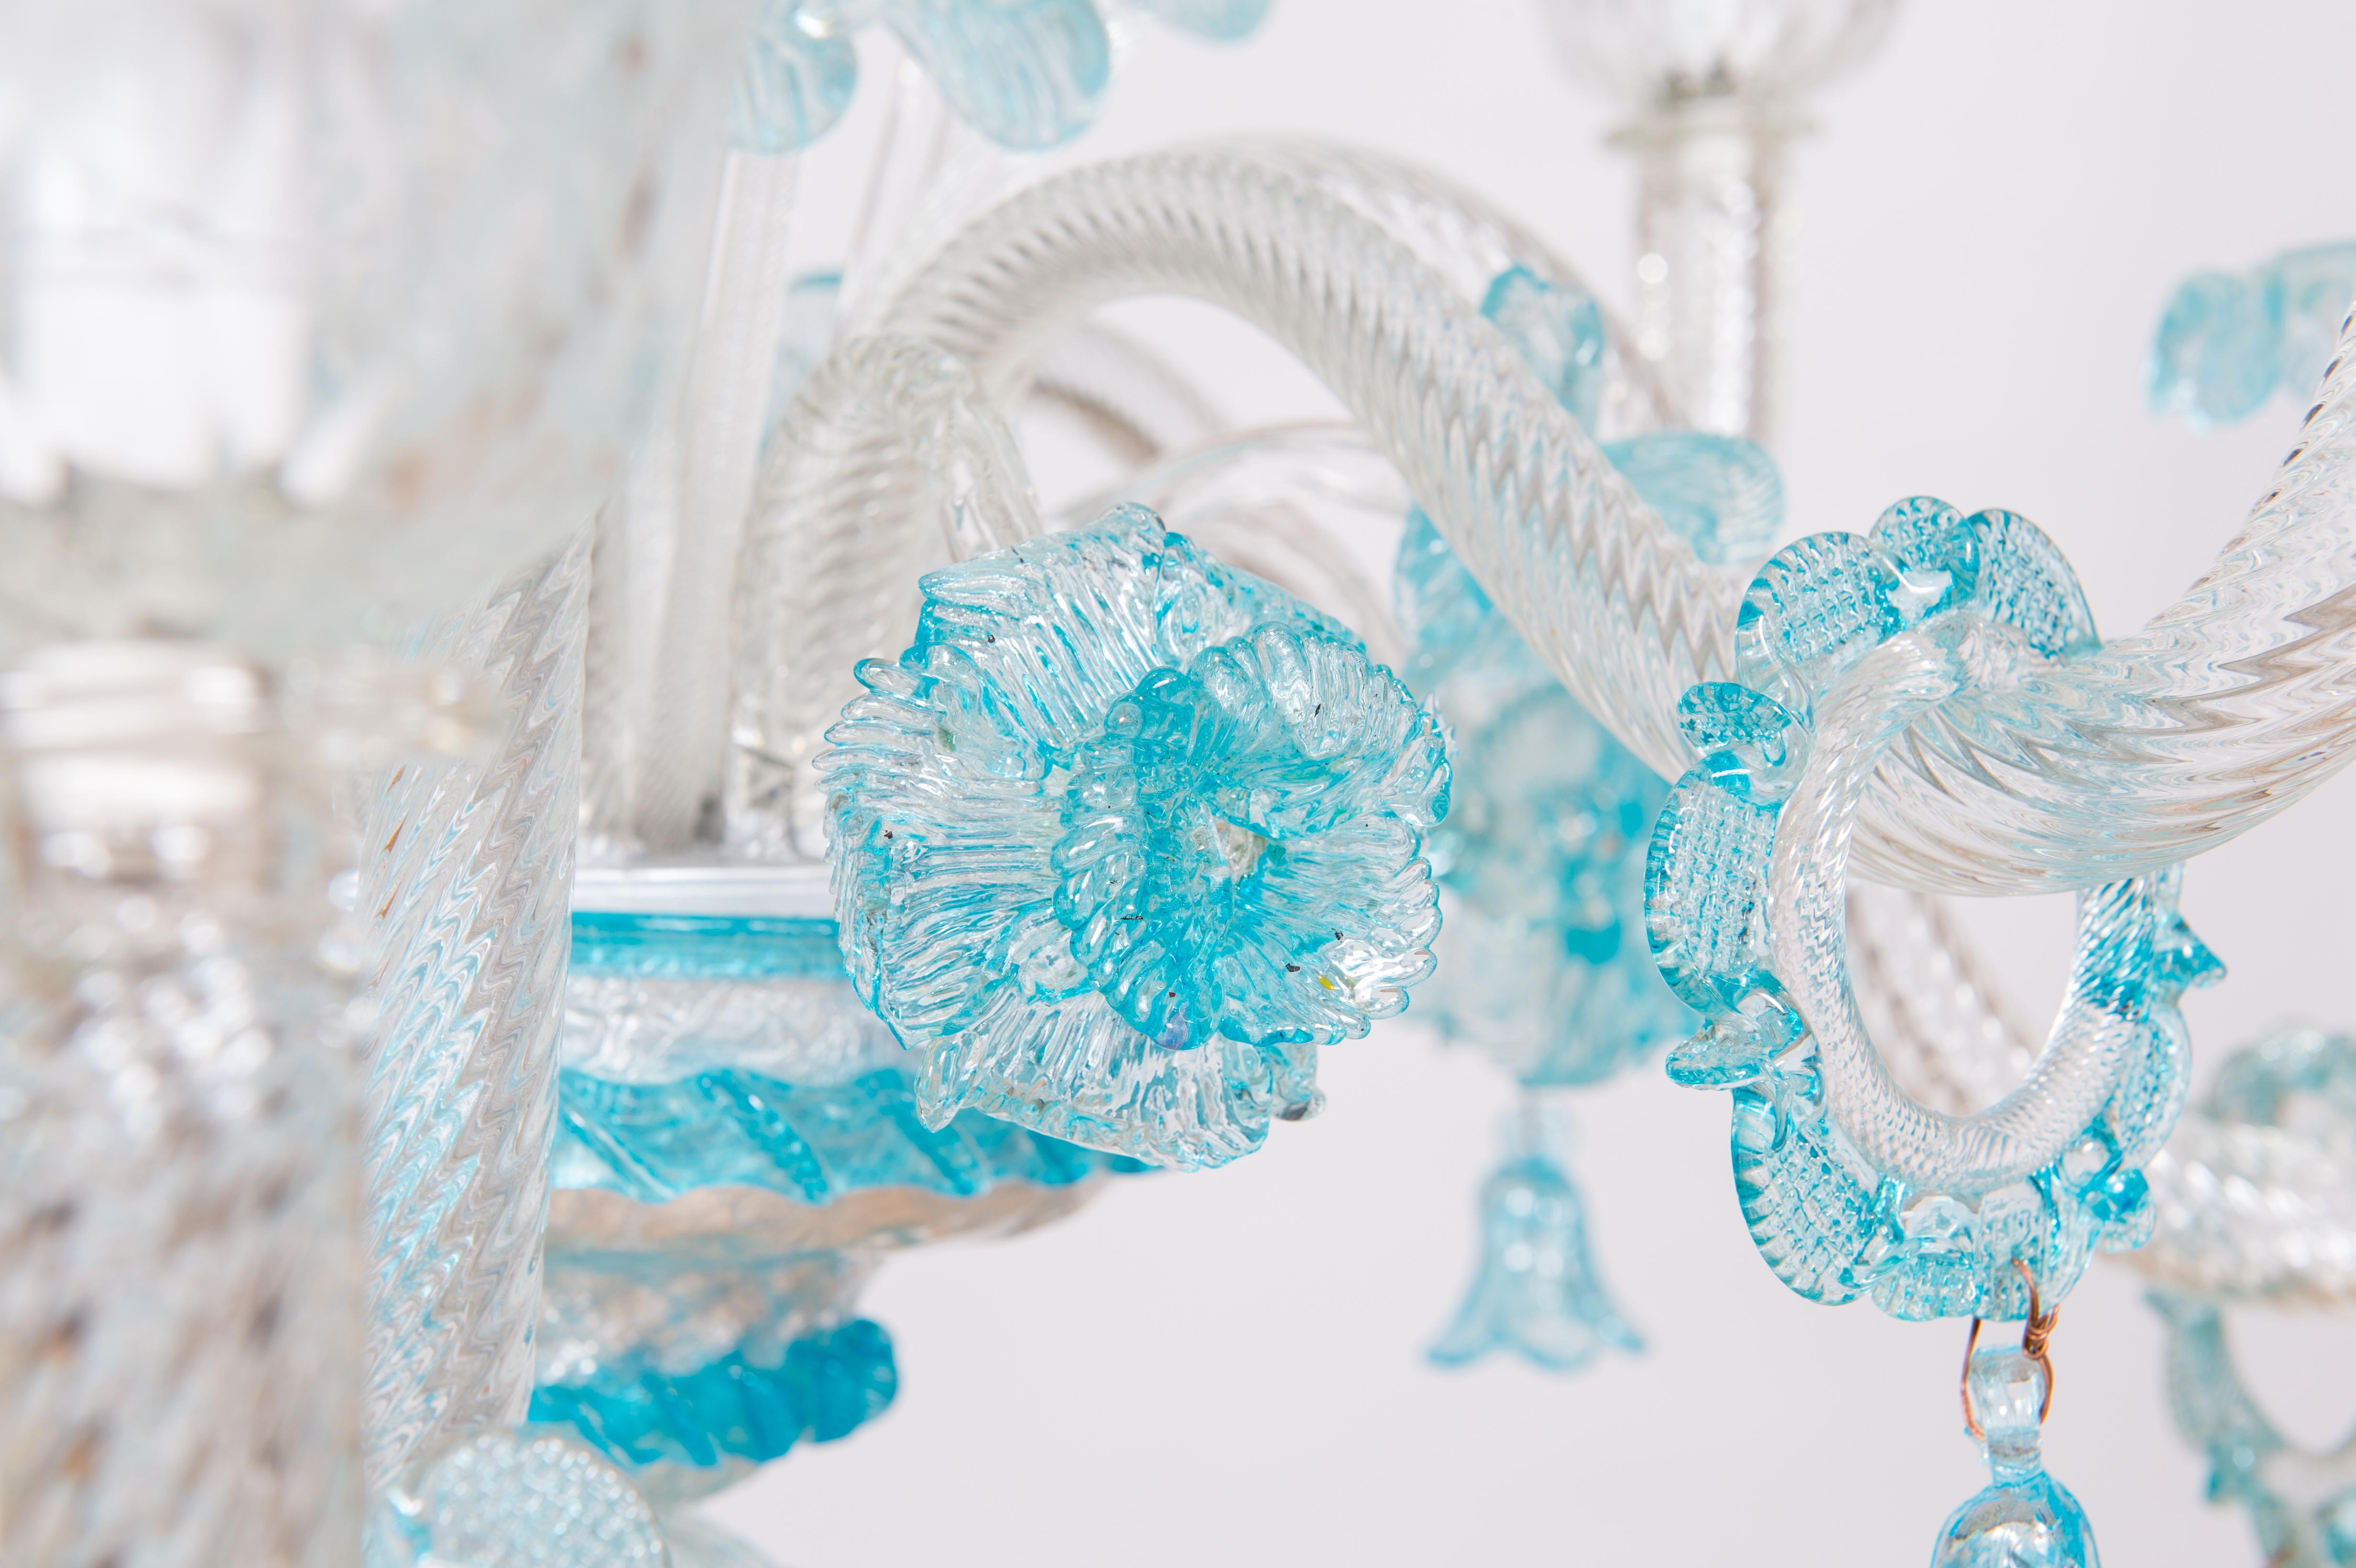 Late 20th Century Double Tiered Murano Glass Chandelier in vivid Blue Floral Patterns 1990s Italy For Sale